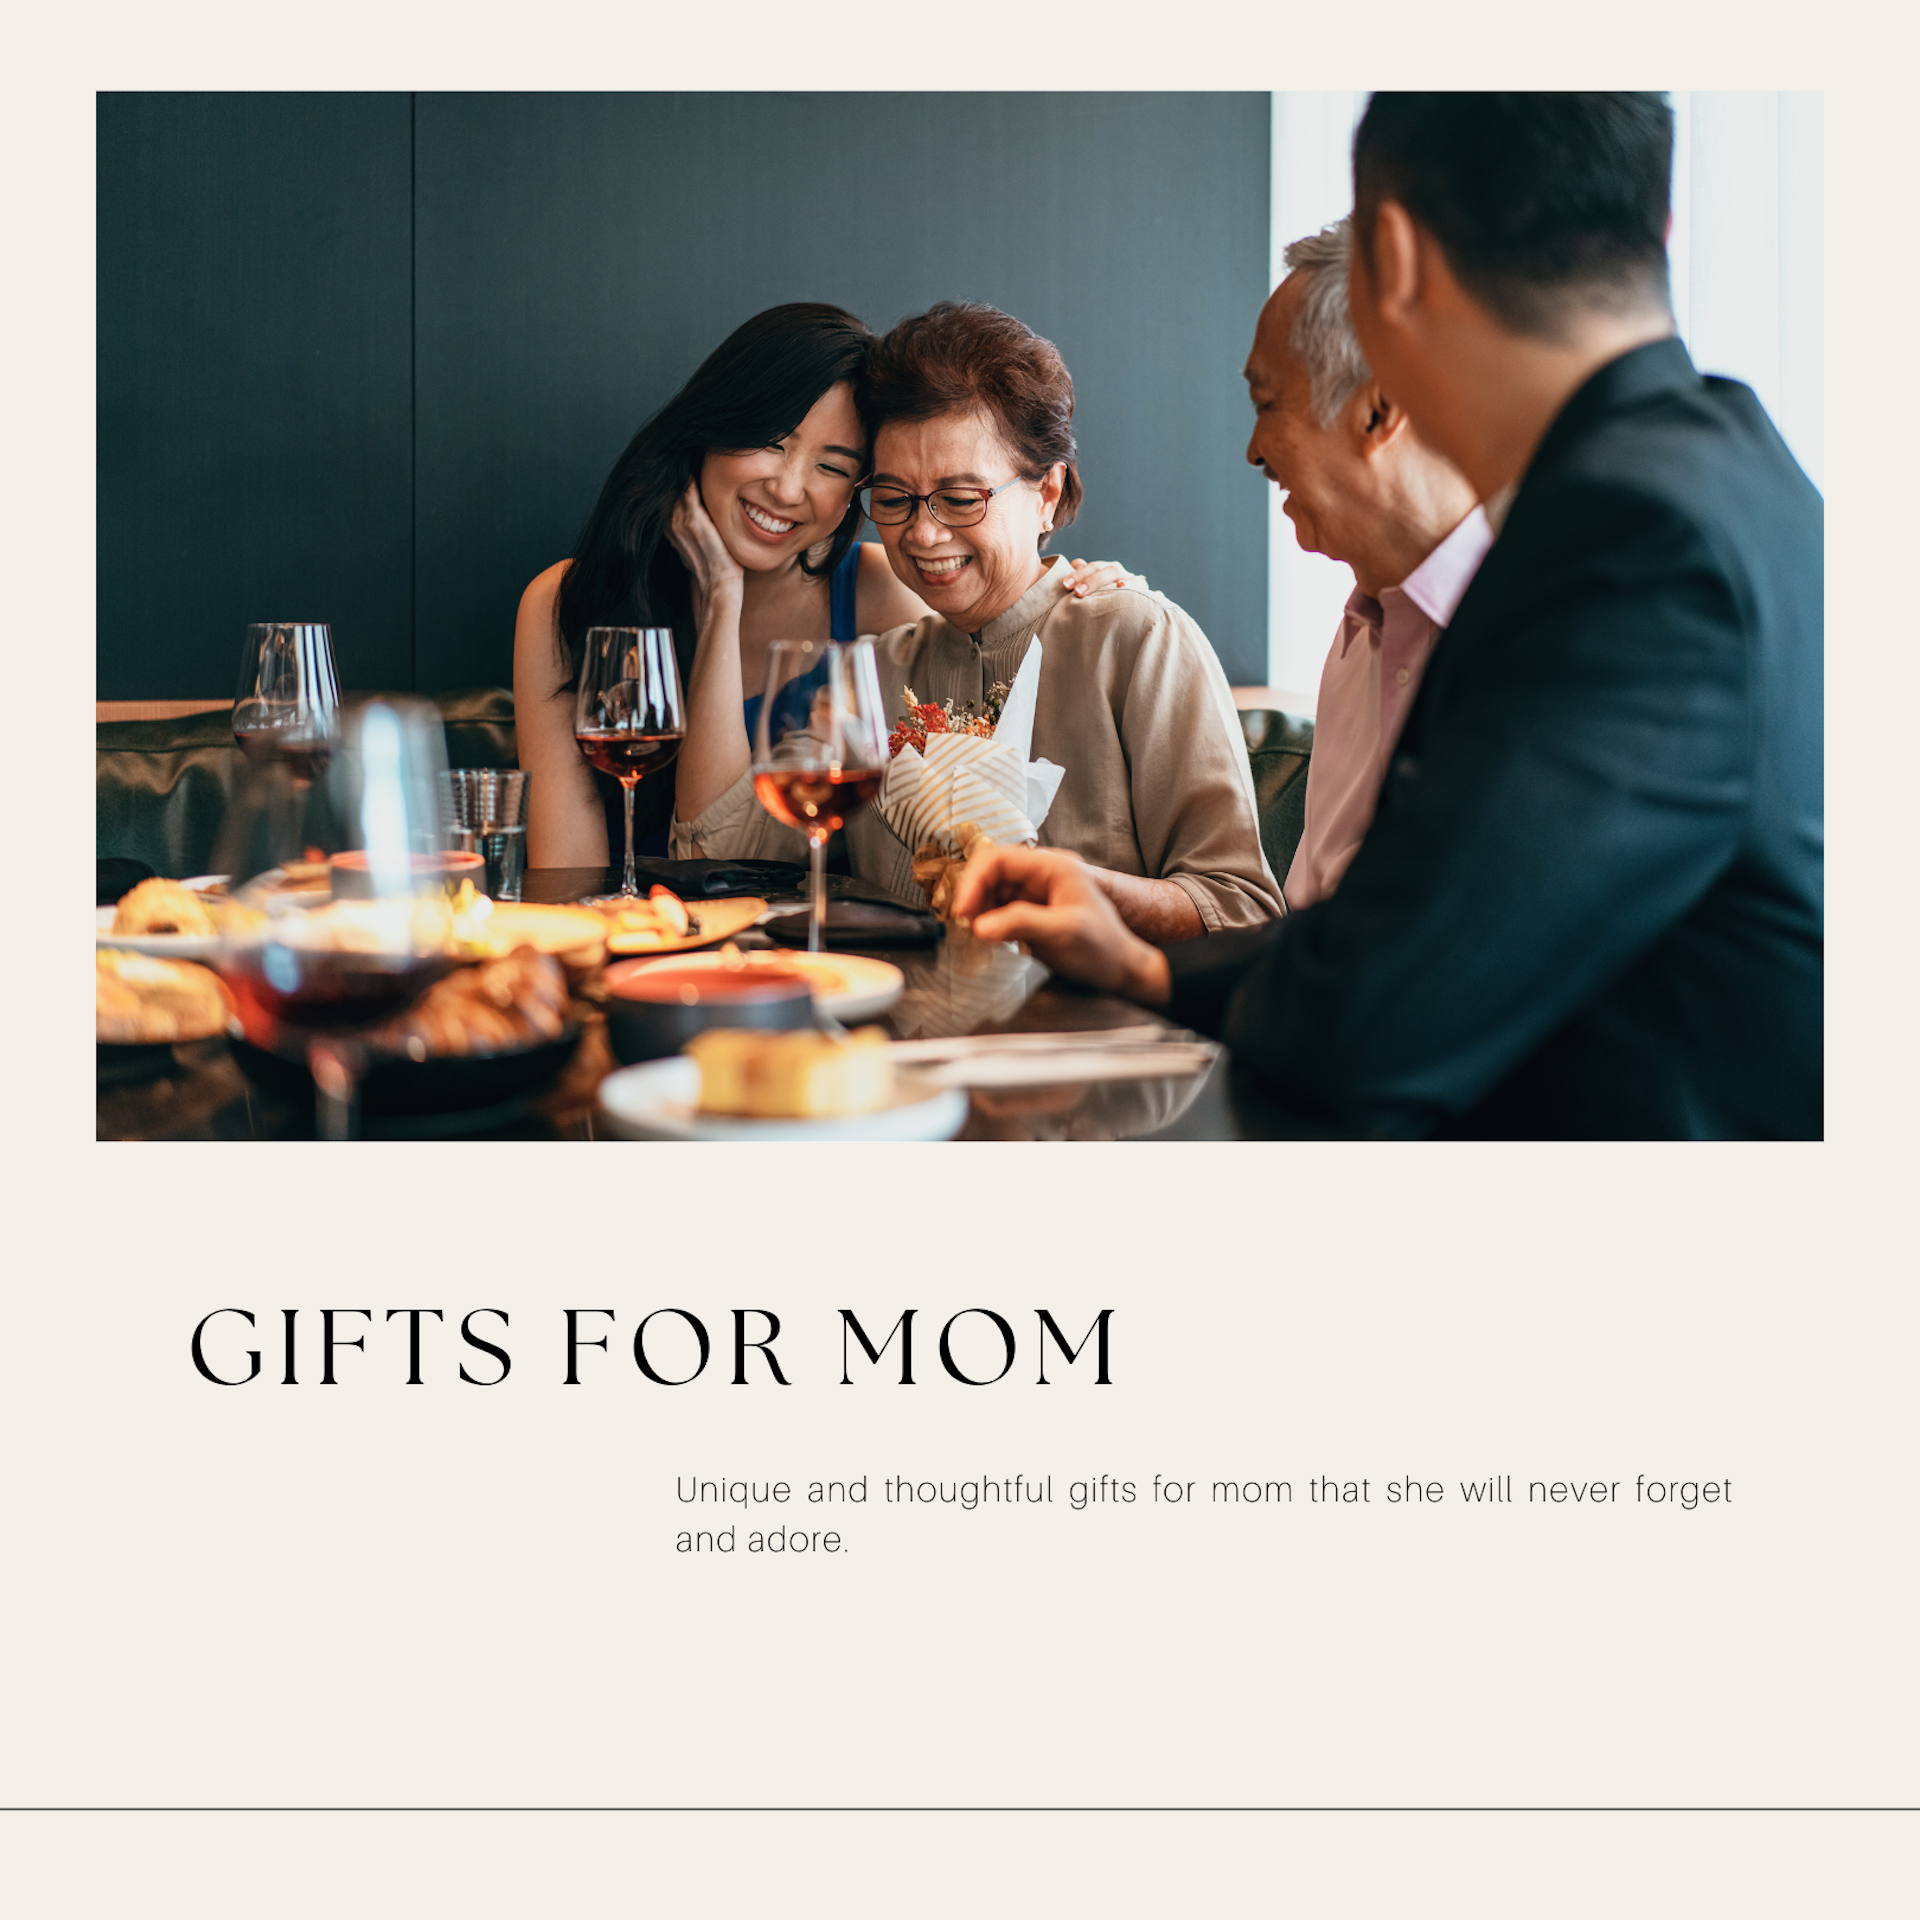 "8 Unique and Thoughtful Mother's Day Gift Ideas to Show Your Love"